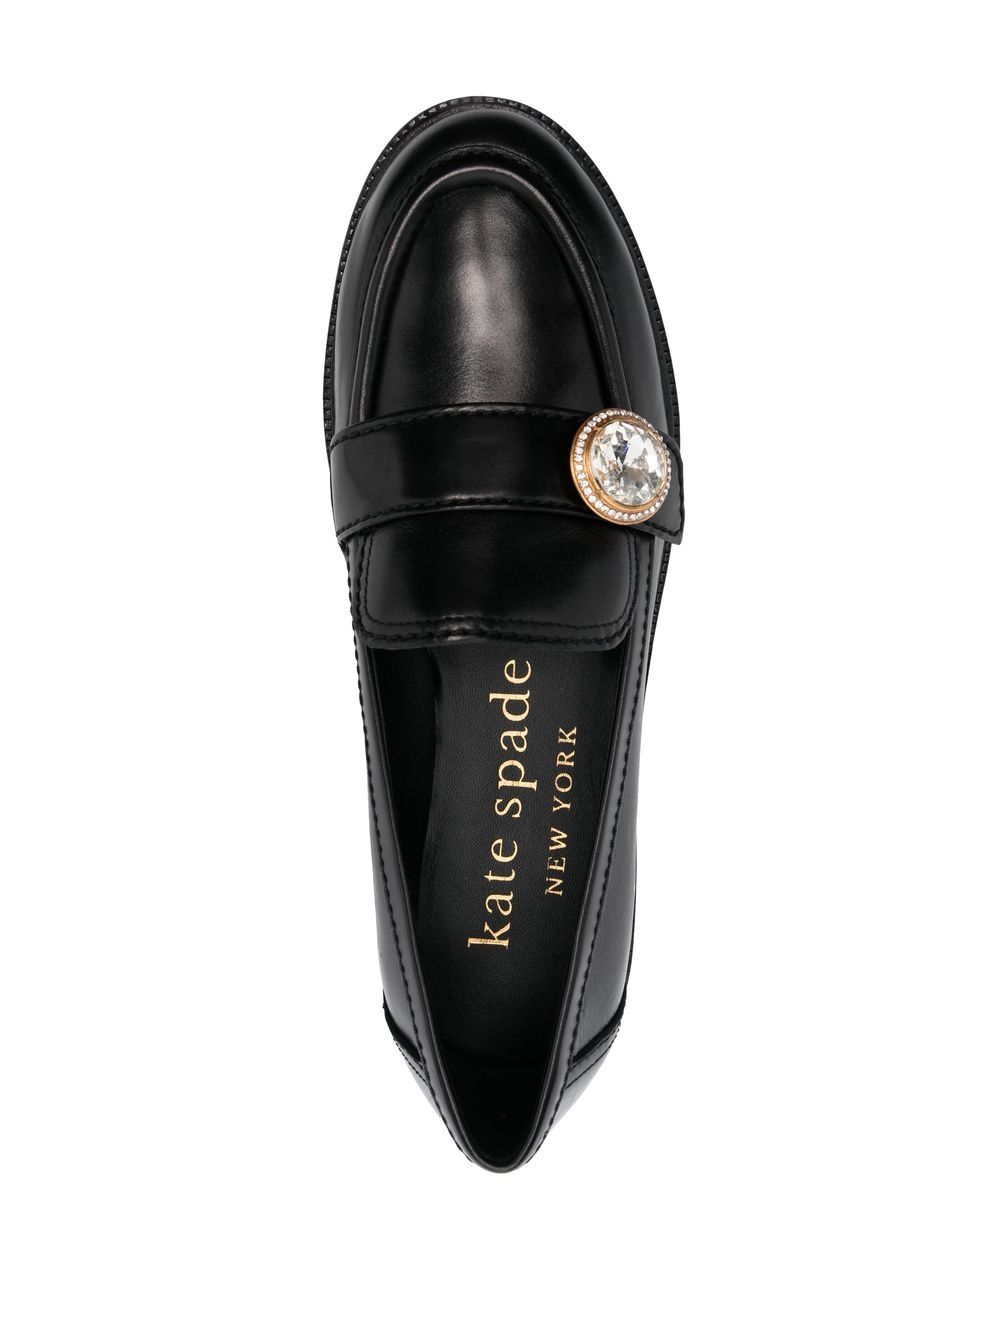 Kate Spade crystal-embellished Leather Loafers - Farfetch